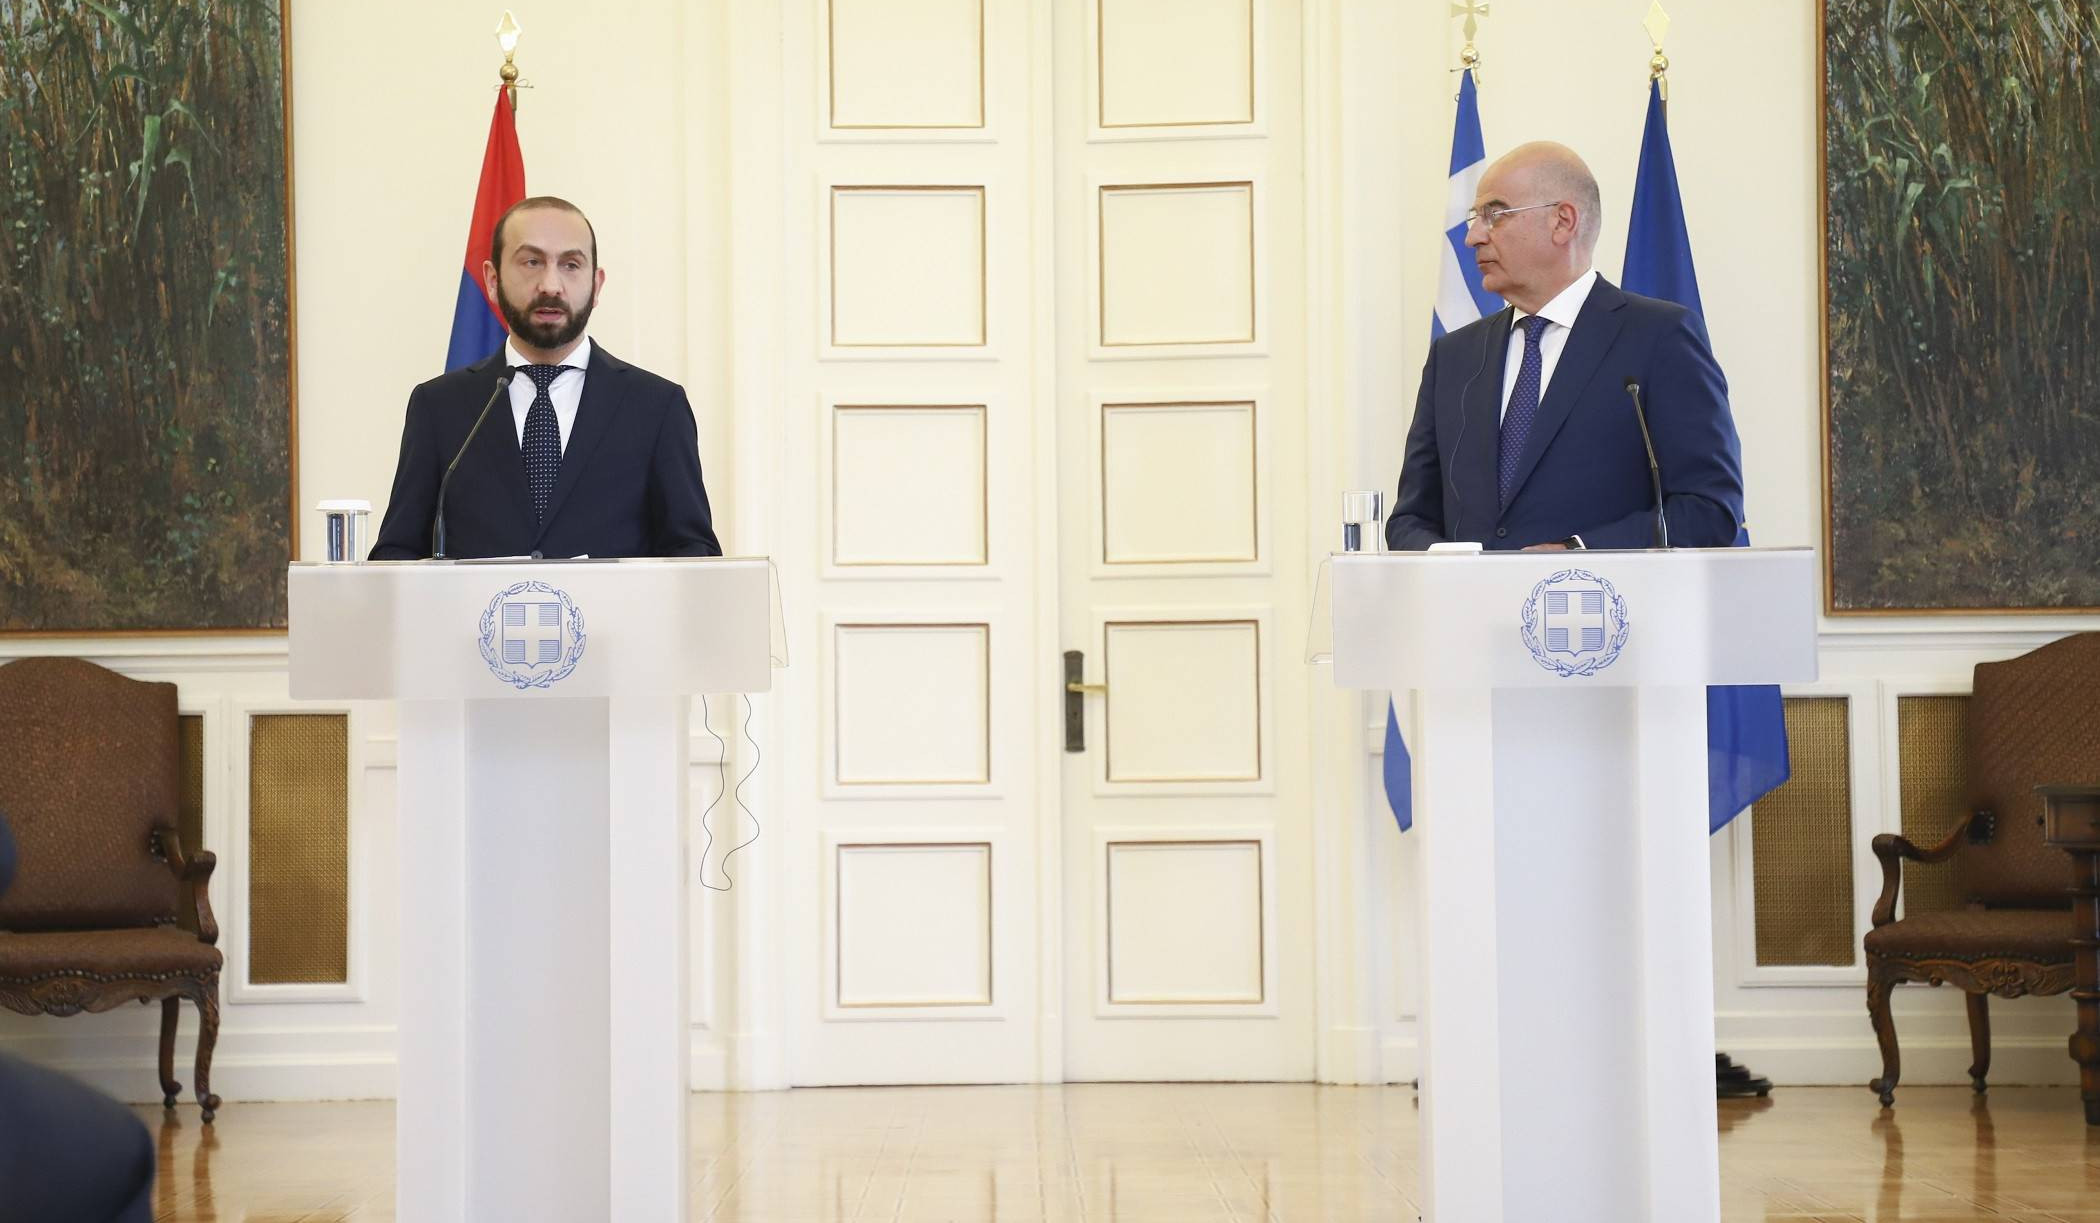 Statement for press of Foreign Minister of Armenia Ararat Mirzoyan following meeting with Foreign Minister of Greece Nikos Dendias